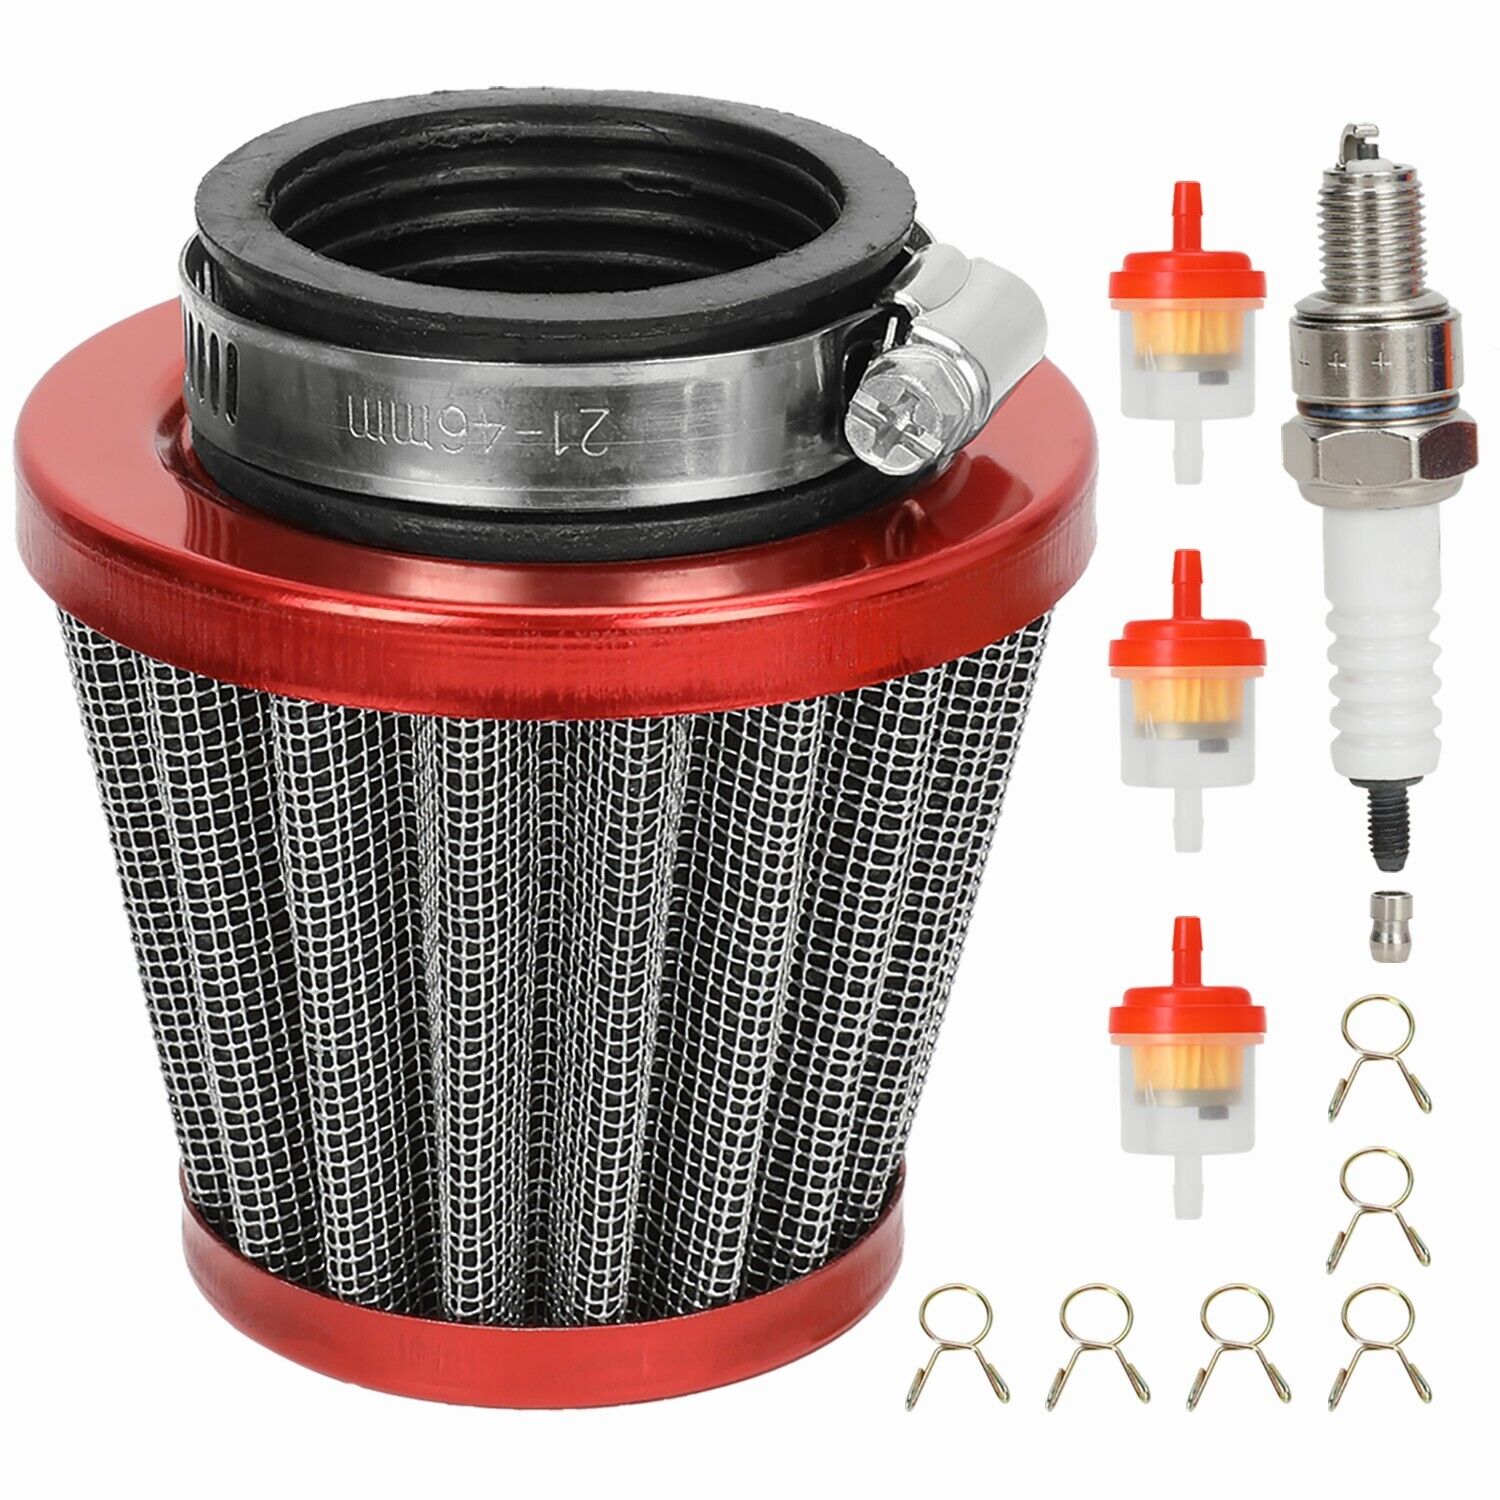 38mm 1.5 Inch Air Filter for 110cc 125cc Apollo SSR GY6 Go Kart Dirt Bike Red